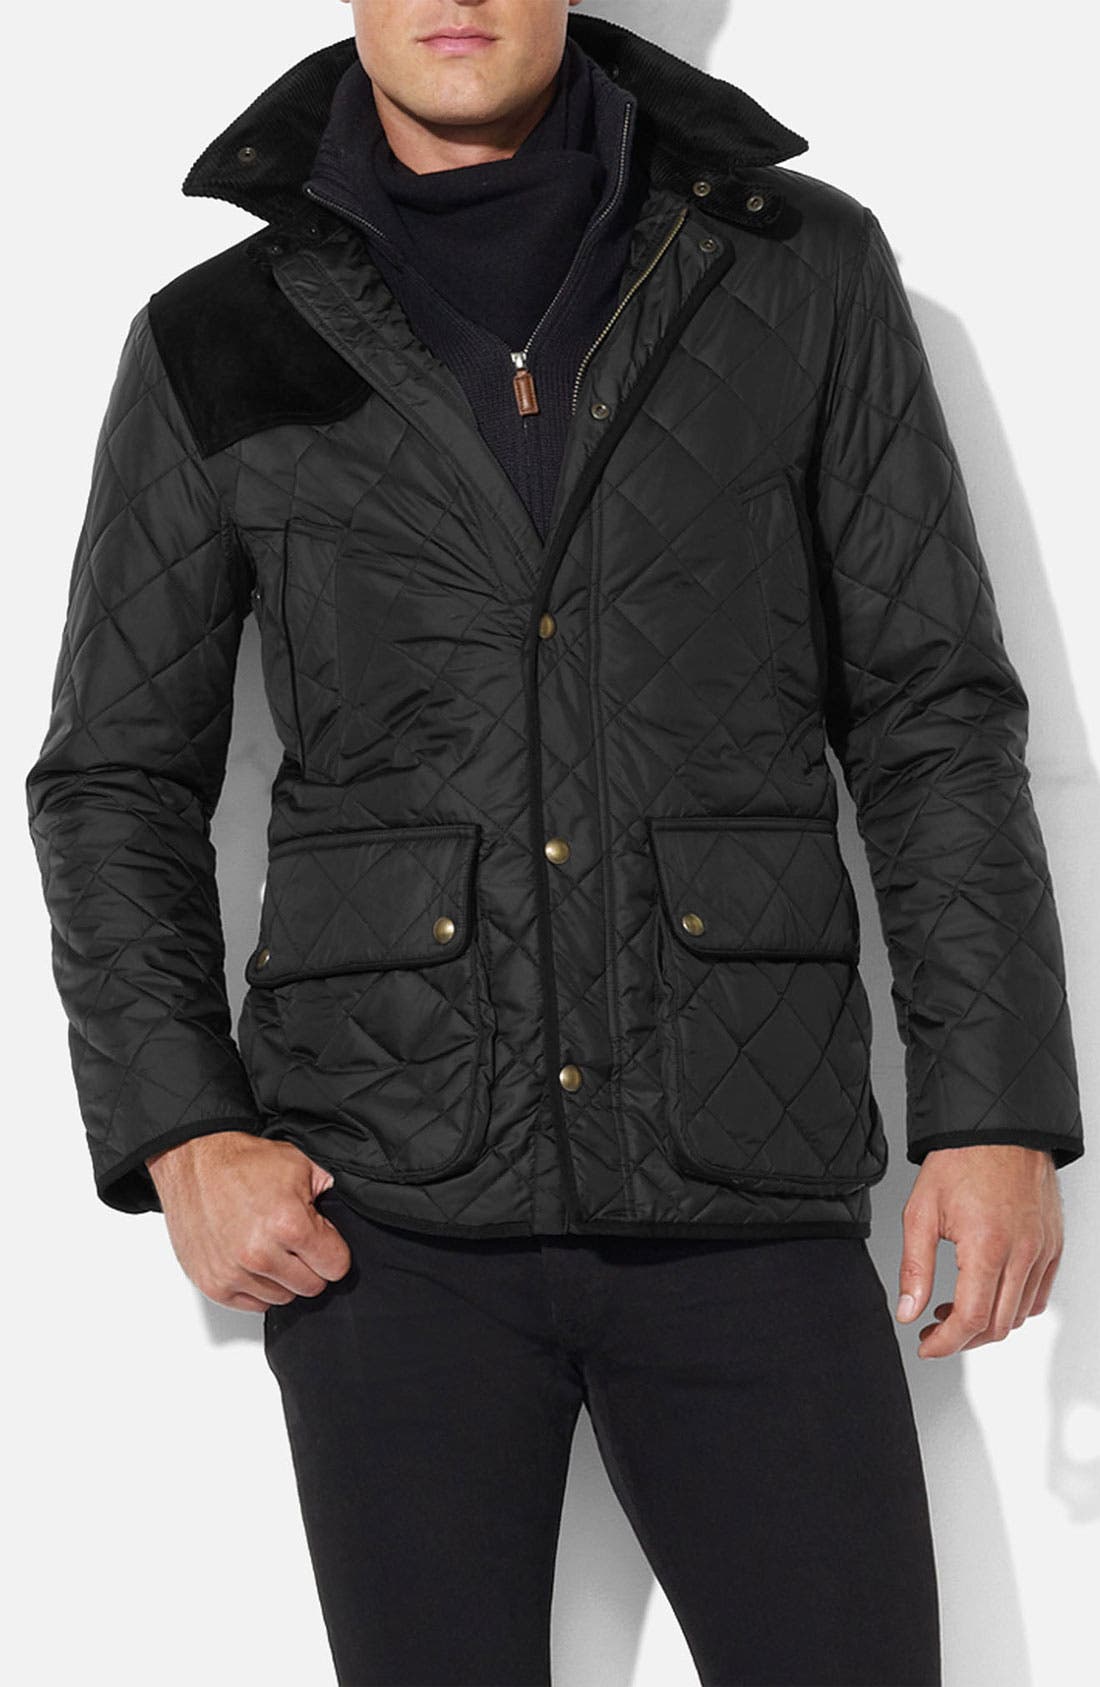 polo quilted car coat